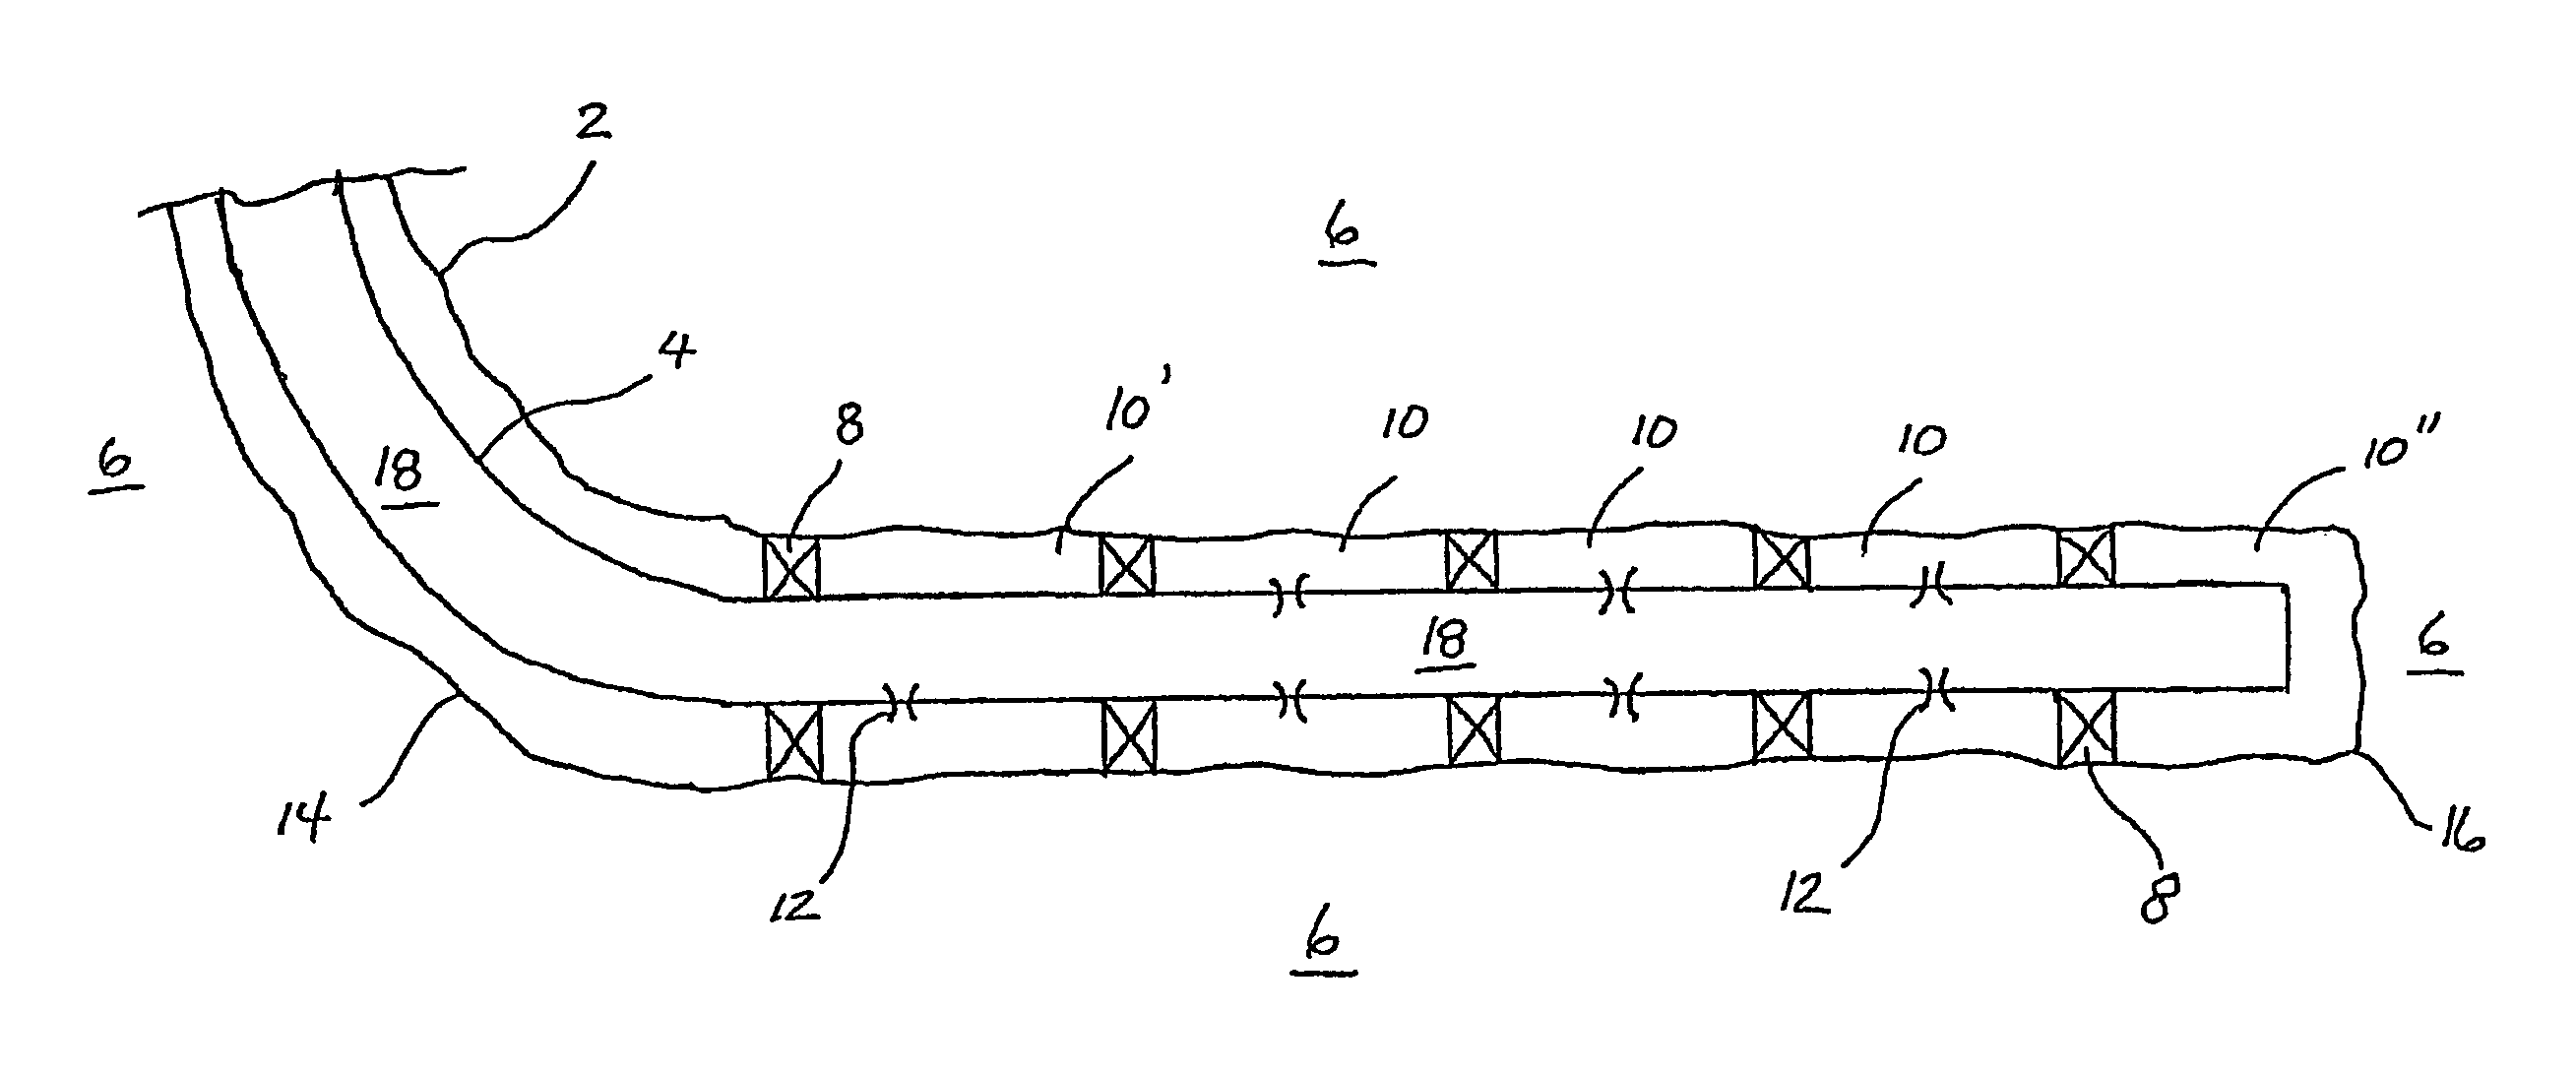 Flow control device for an injection pipe string